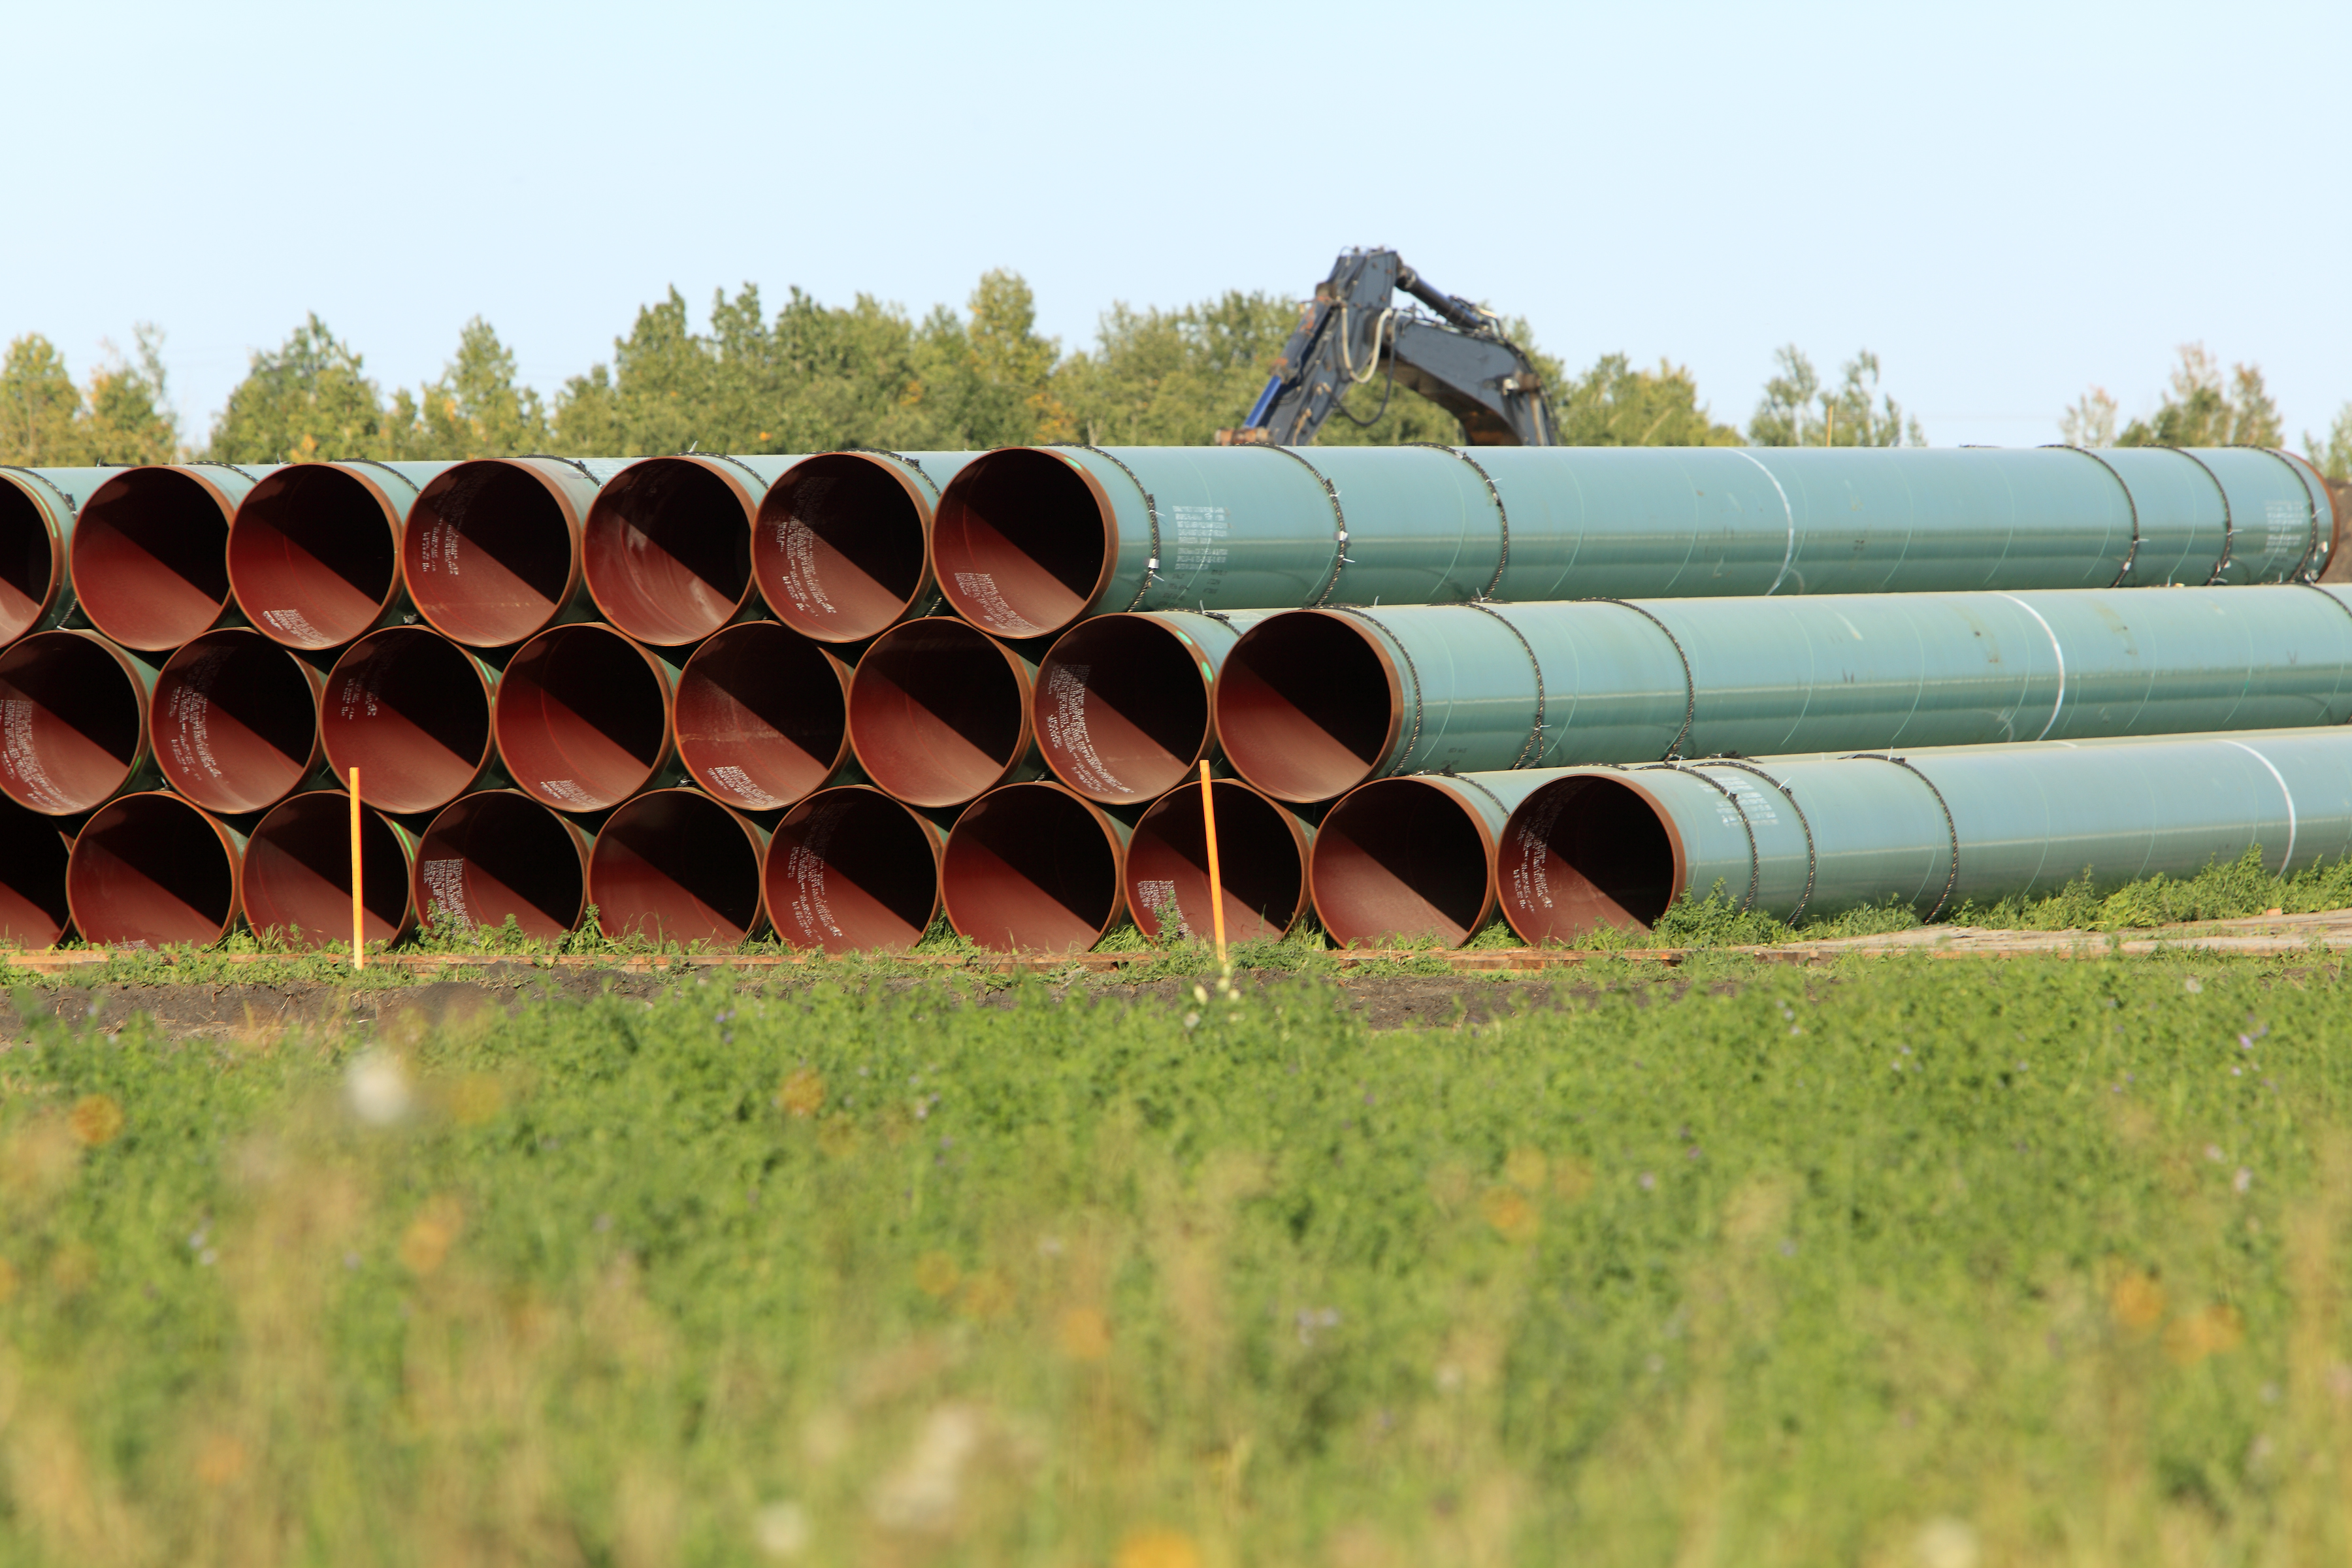 Stack of pipe sections ready for laying pipeline across prairie land